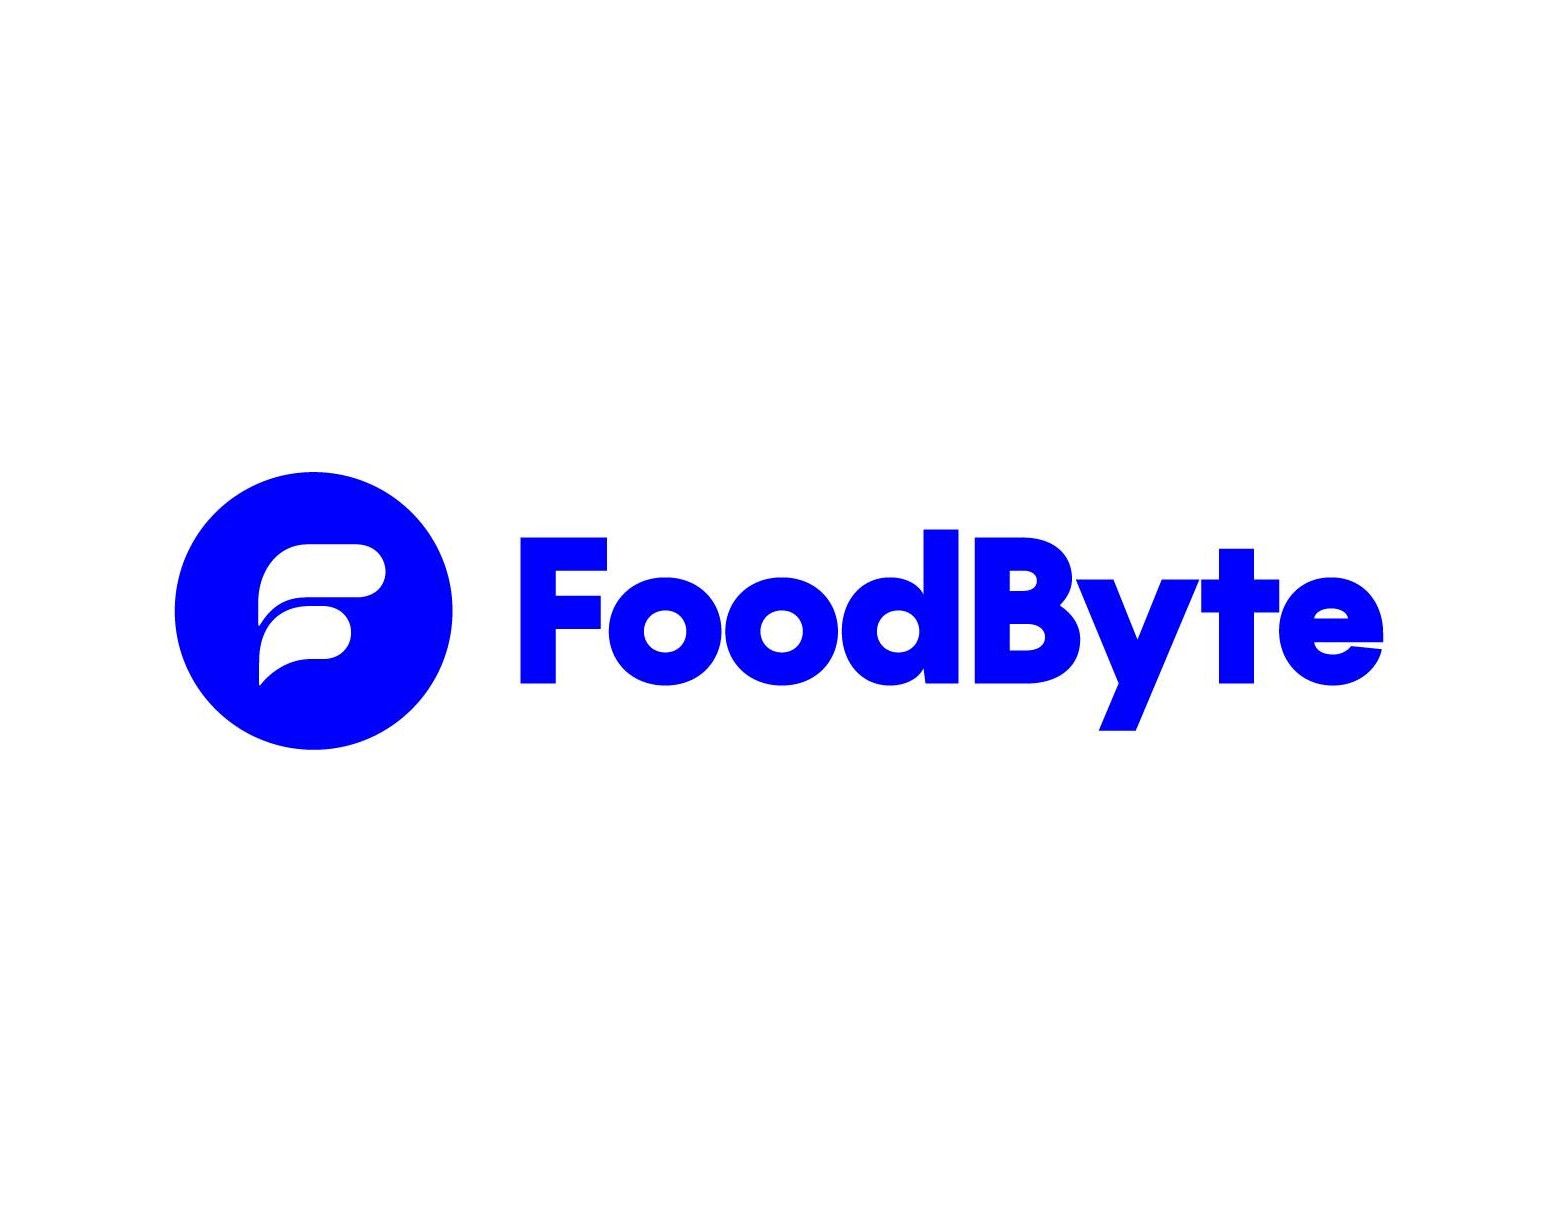 Automated Food Safety for Small Teams - FoodByte